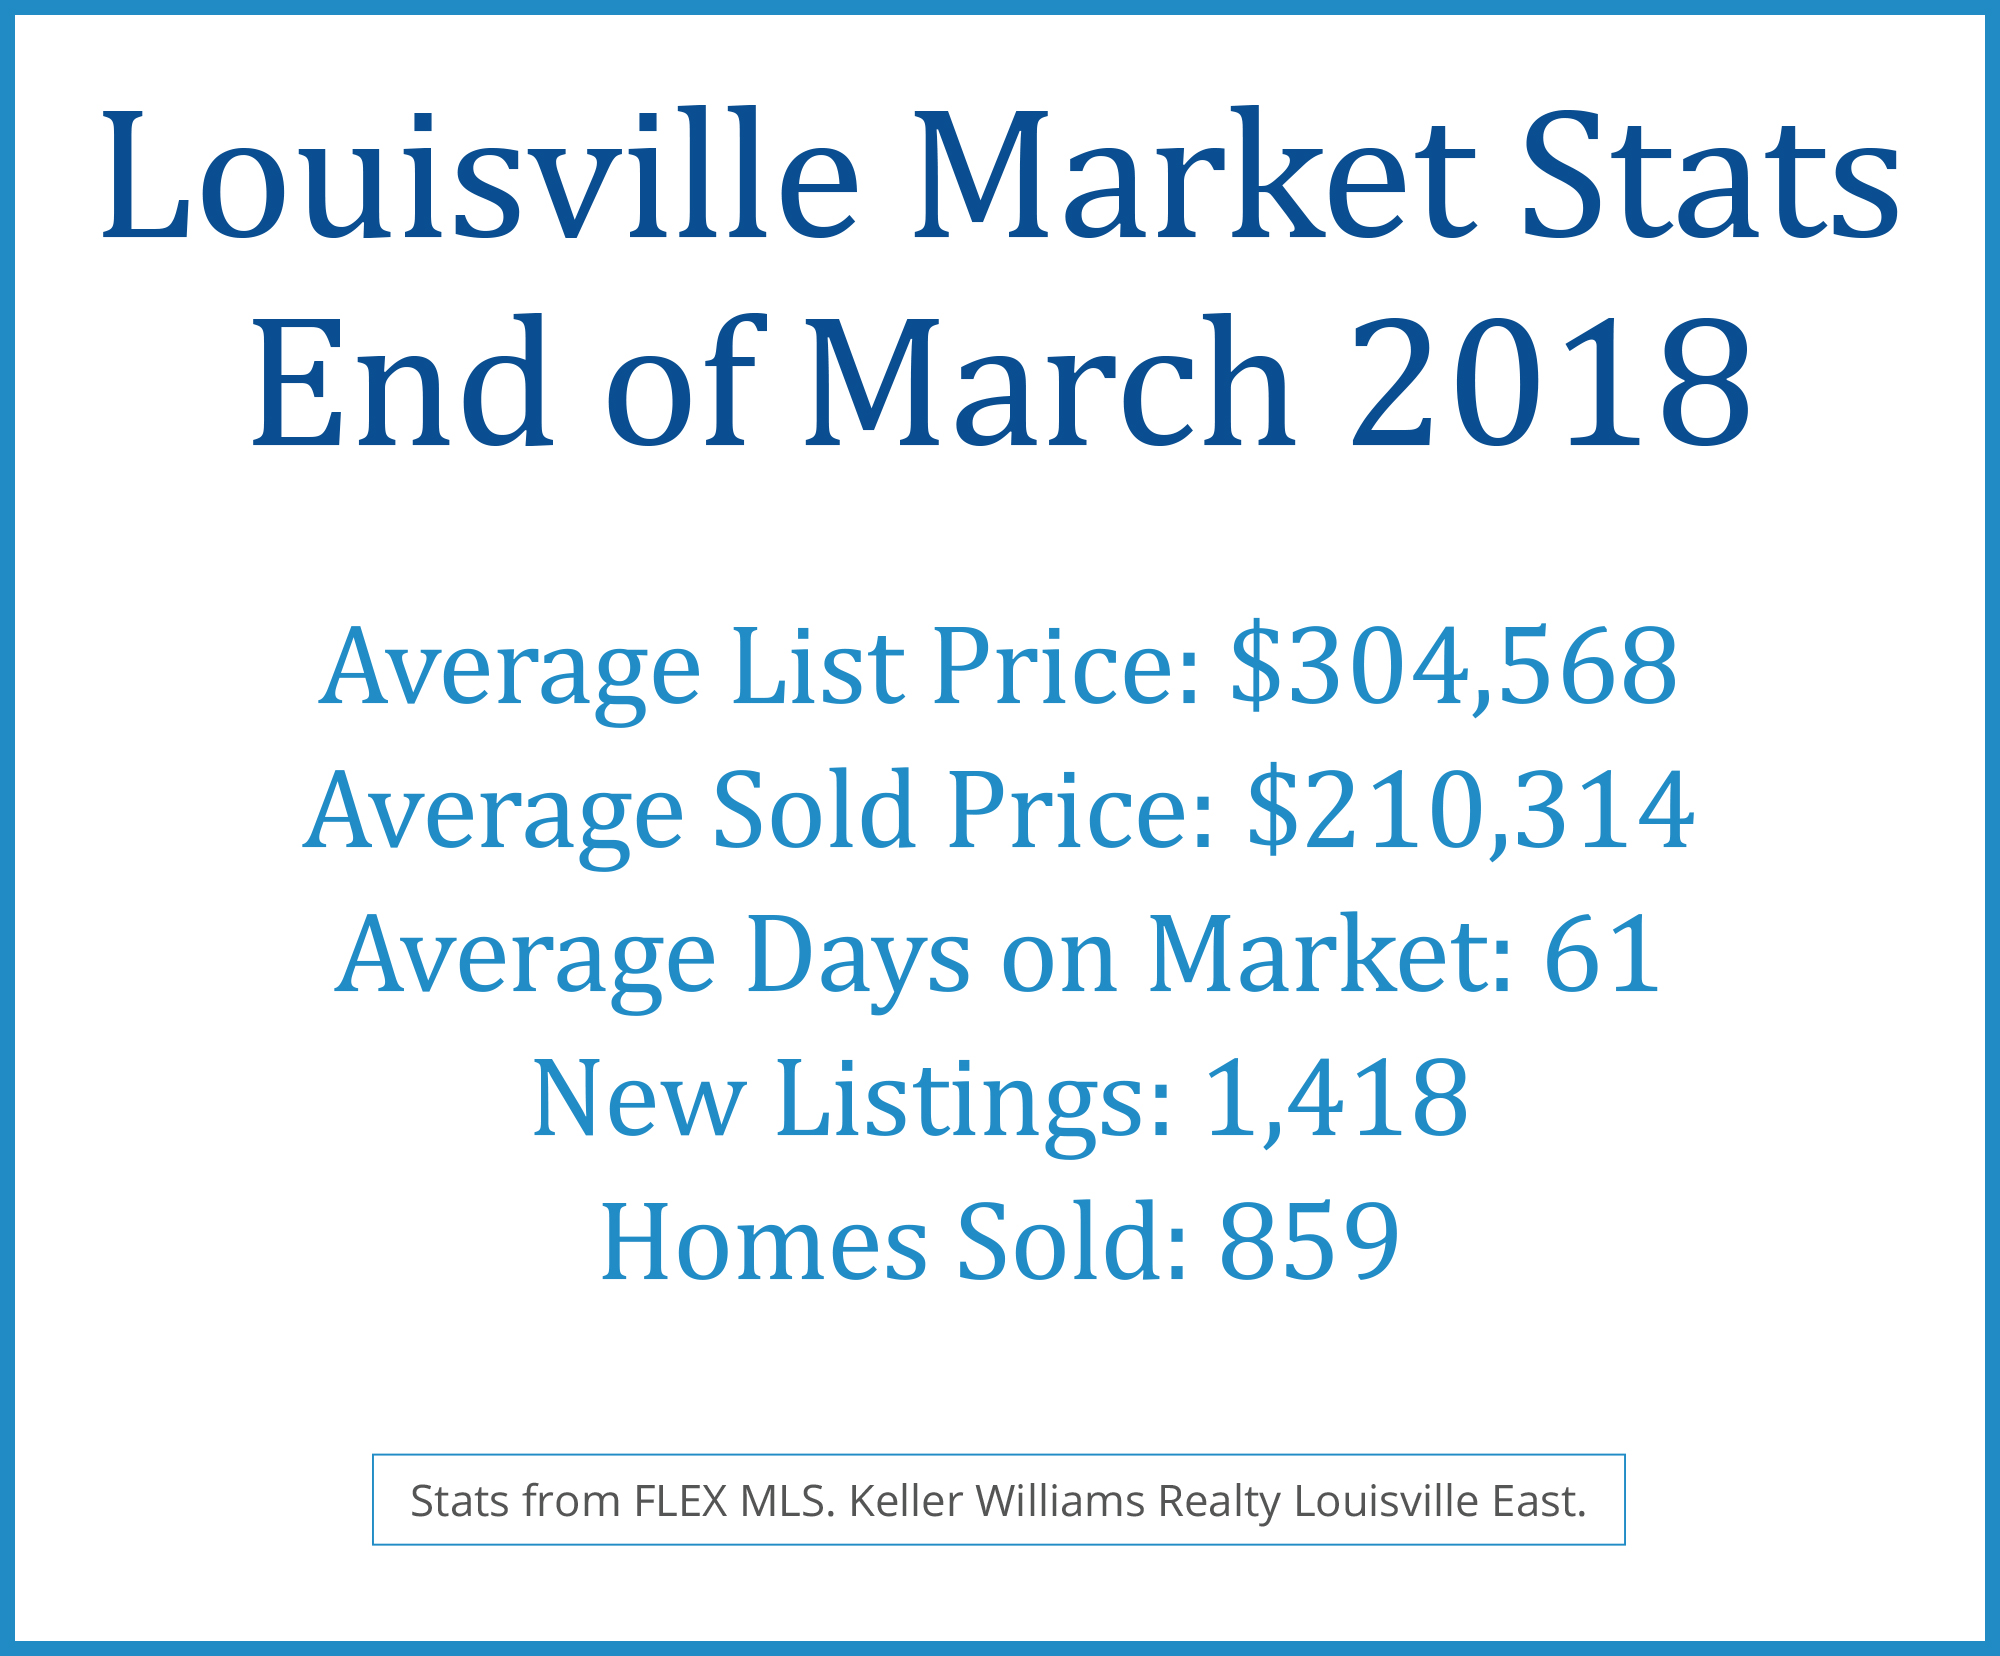 Louisville market stats for March 2018.